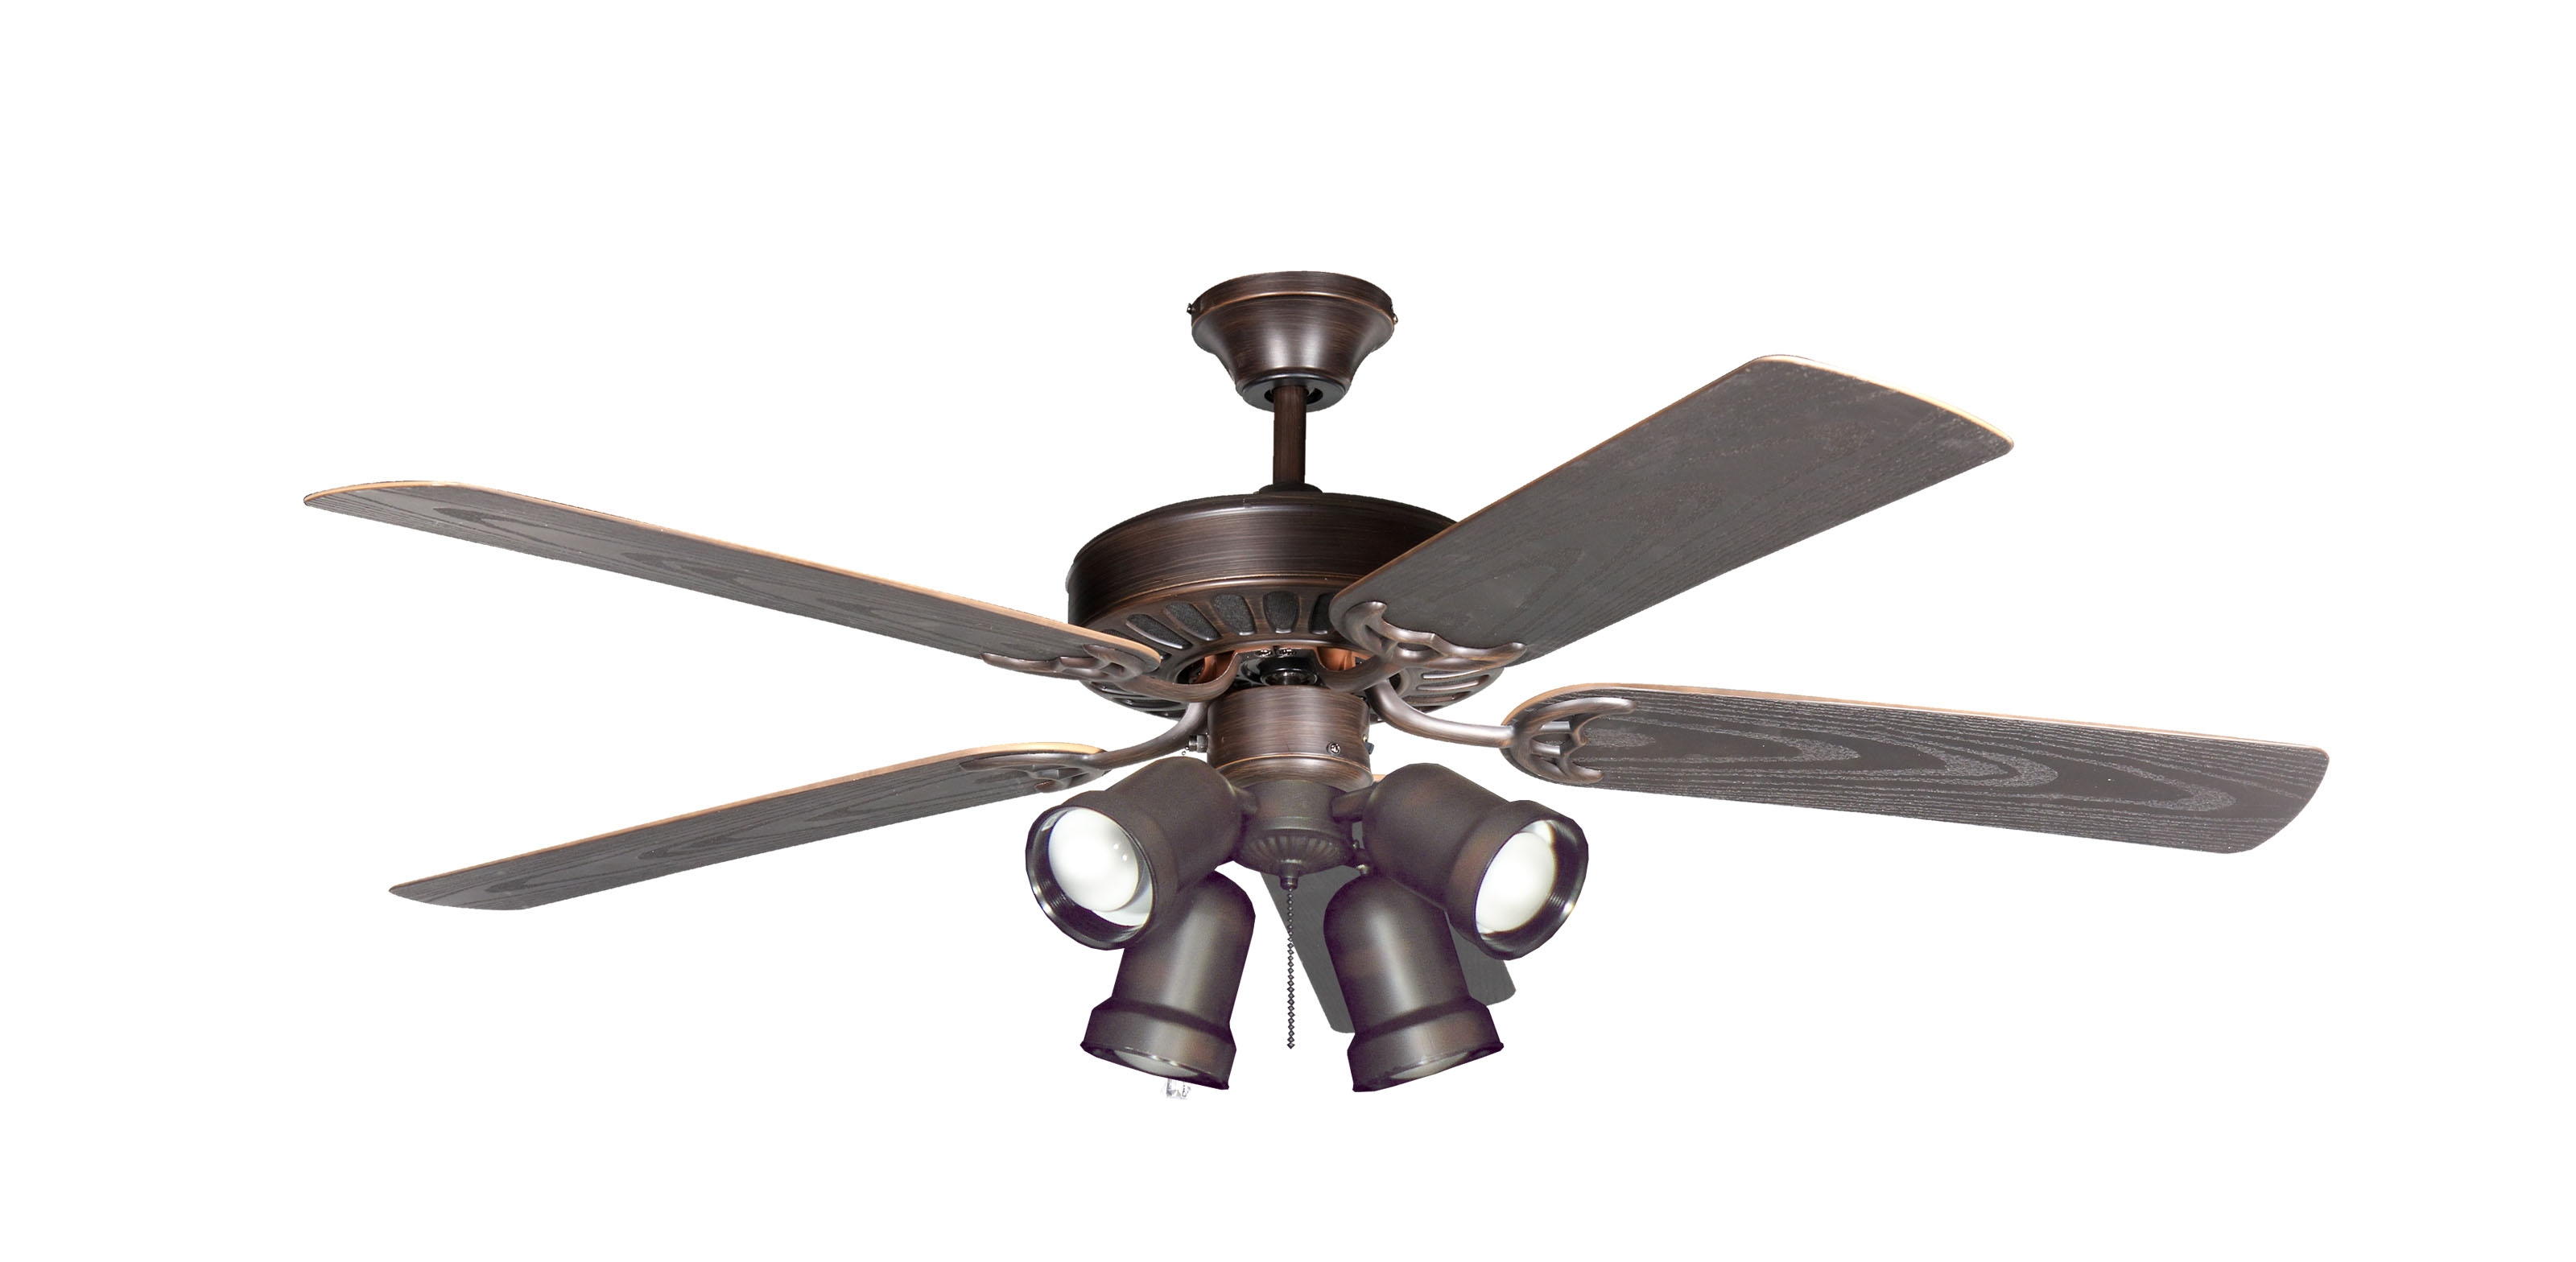 Permalink to Patio Ceiling Fans With Lights